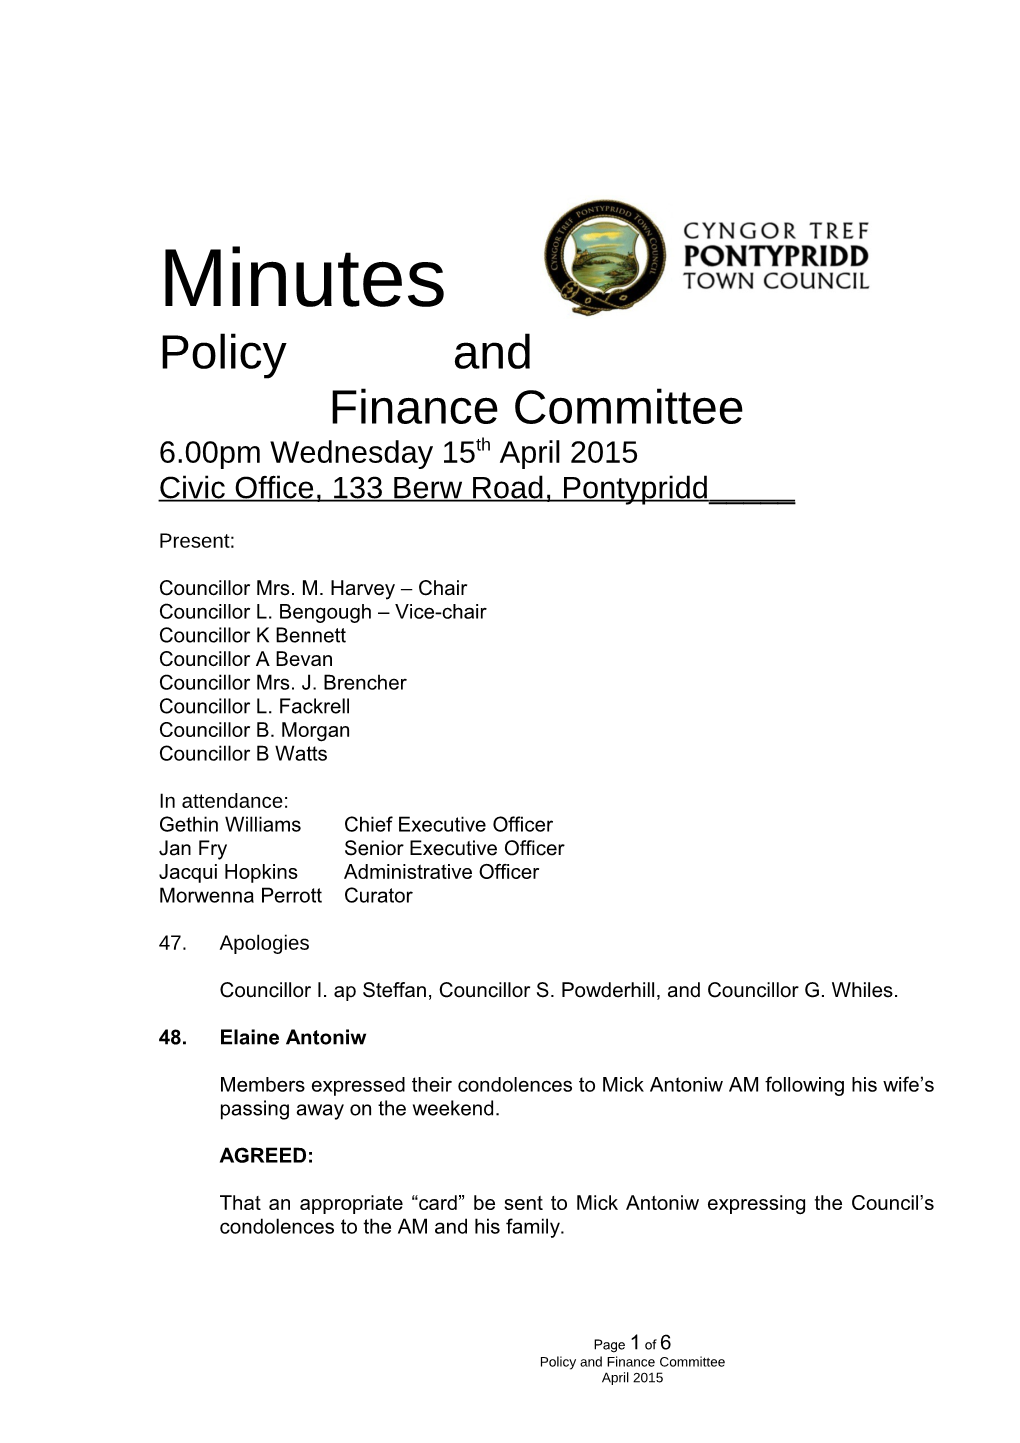 Policy and Finance Committee